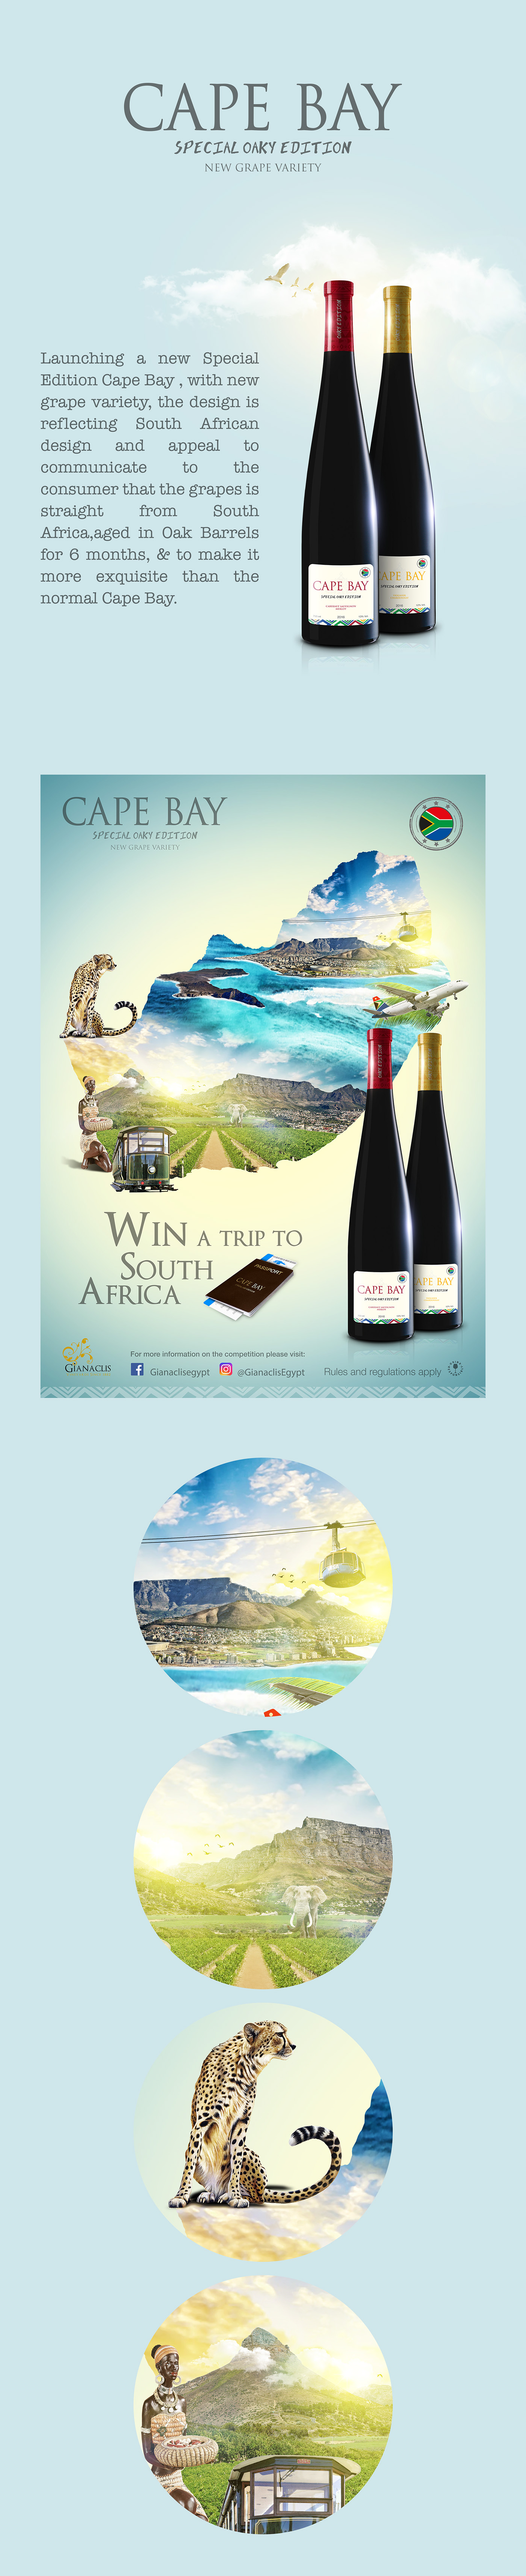 wine south africa cape town Cape Bay drink alchohol africa Passport Travel Vineyards